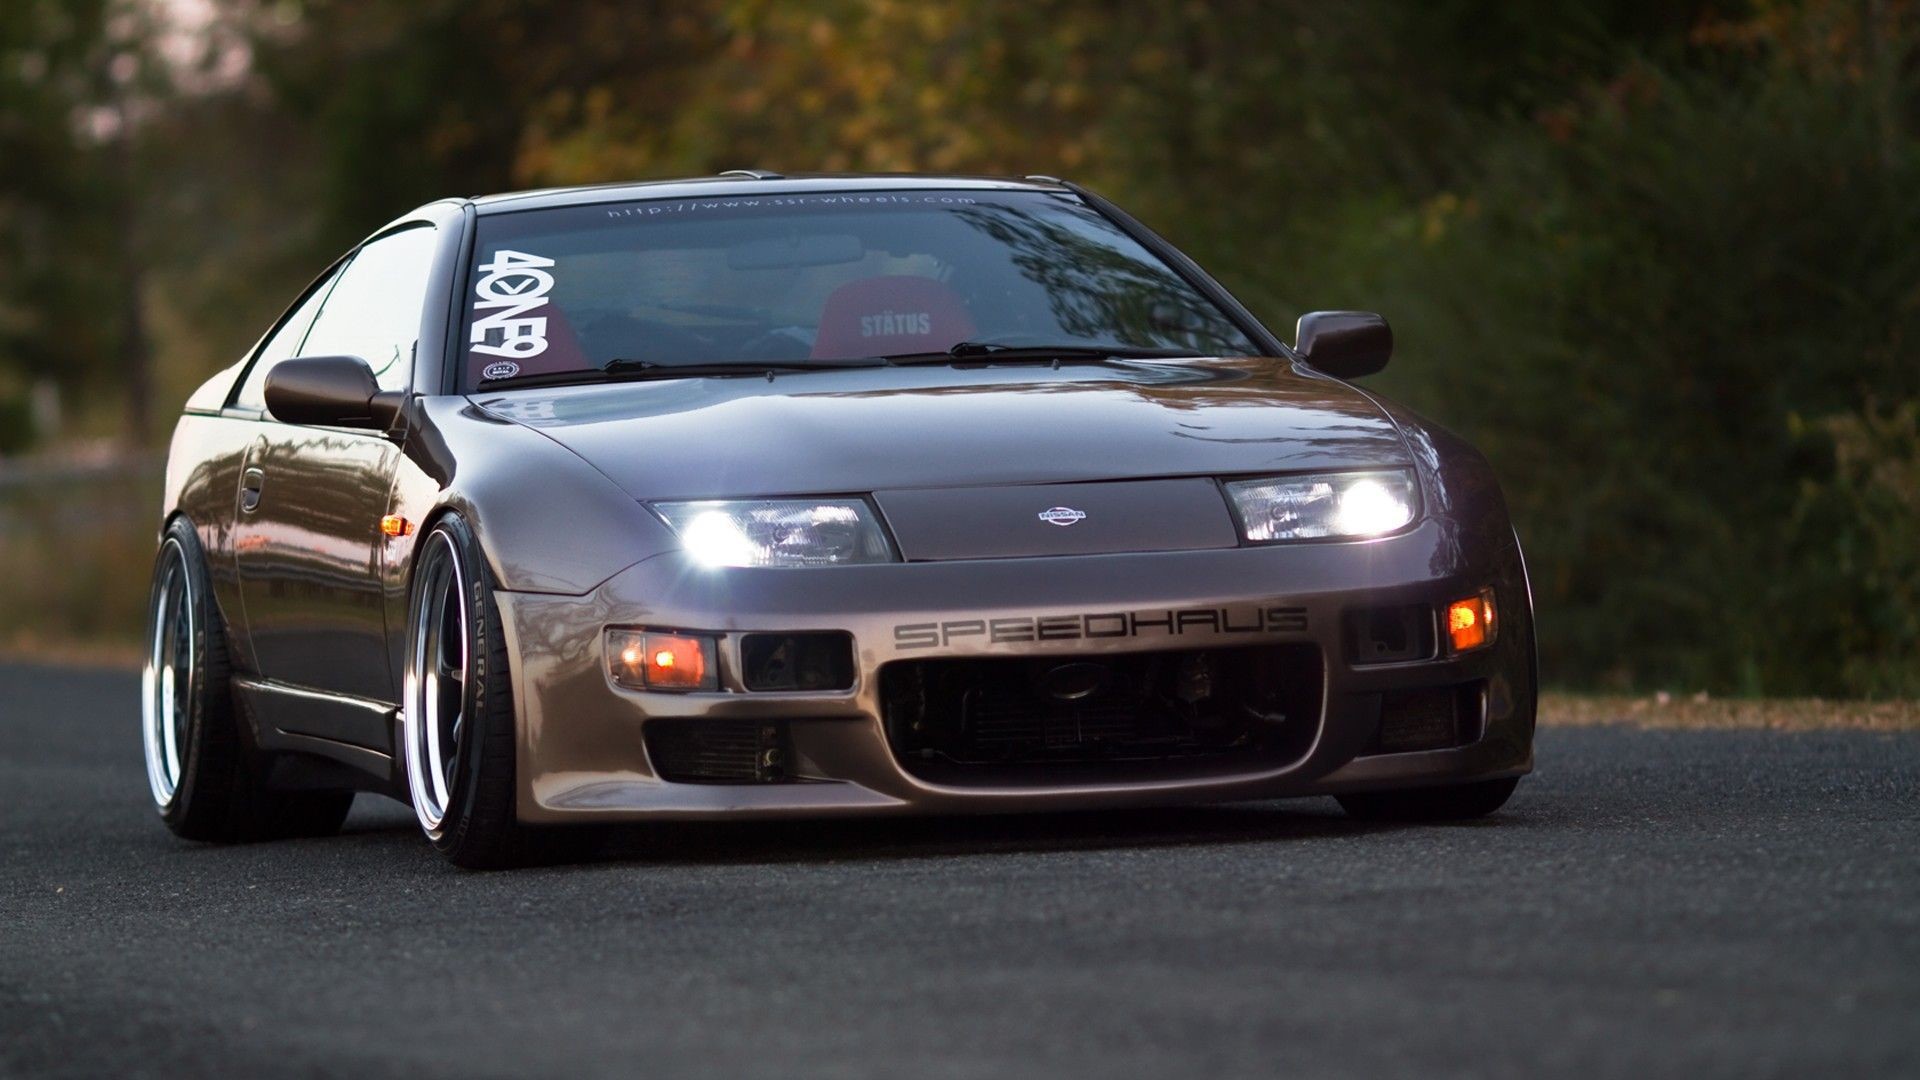 1920x1080 Nissan 300ZX Wallpapers Images Photos Pictures Backgrounds